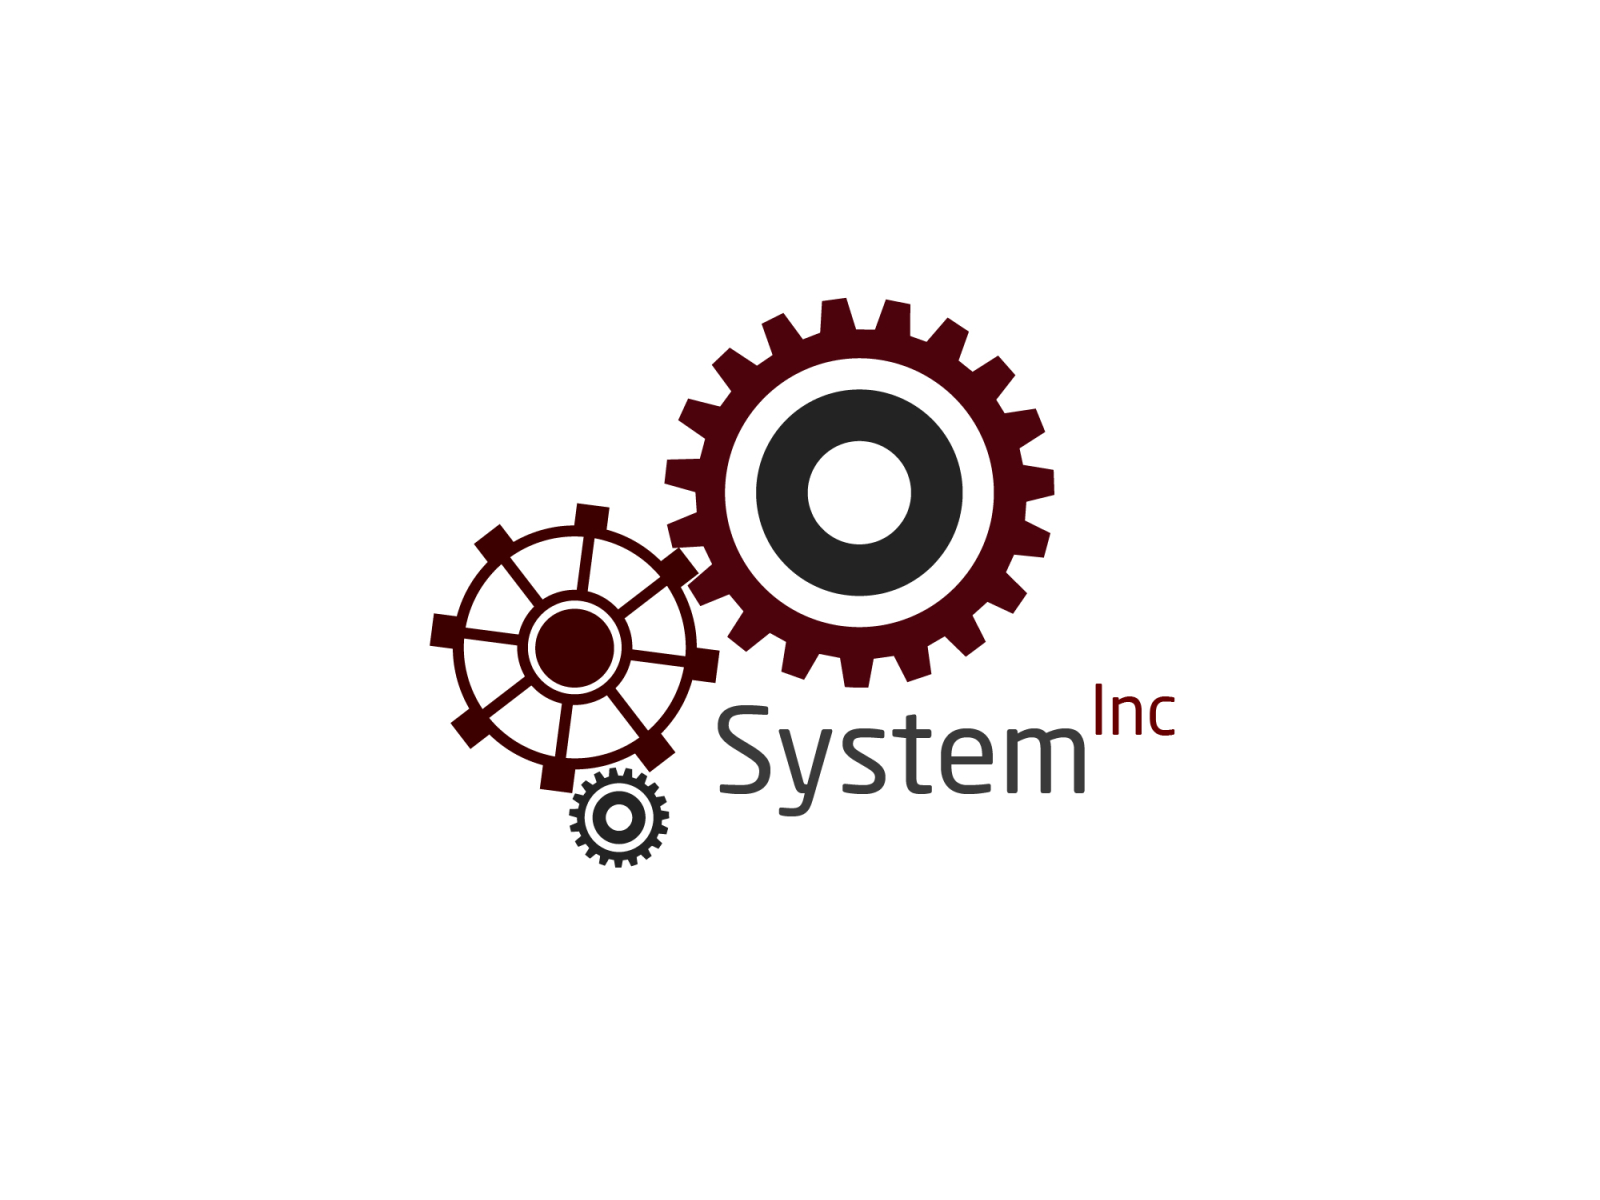 System Logo - Free Vectors & PSDs to Download